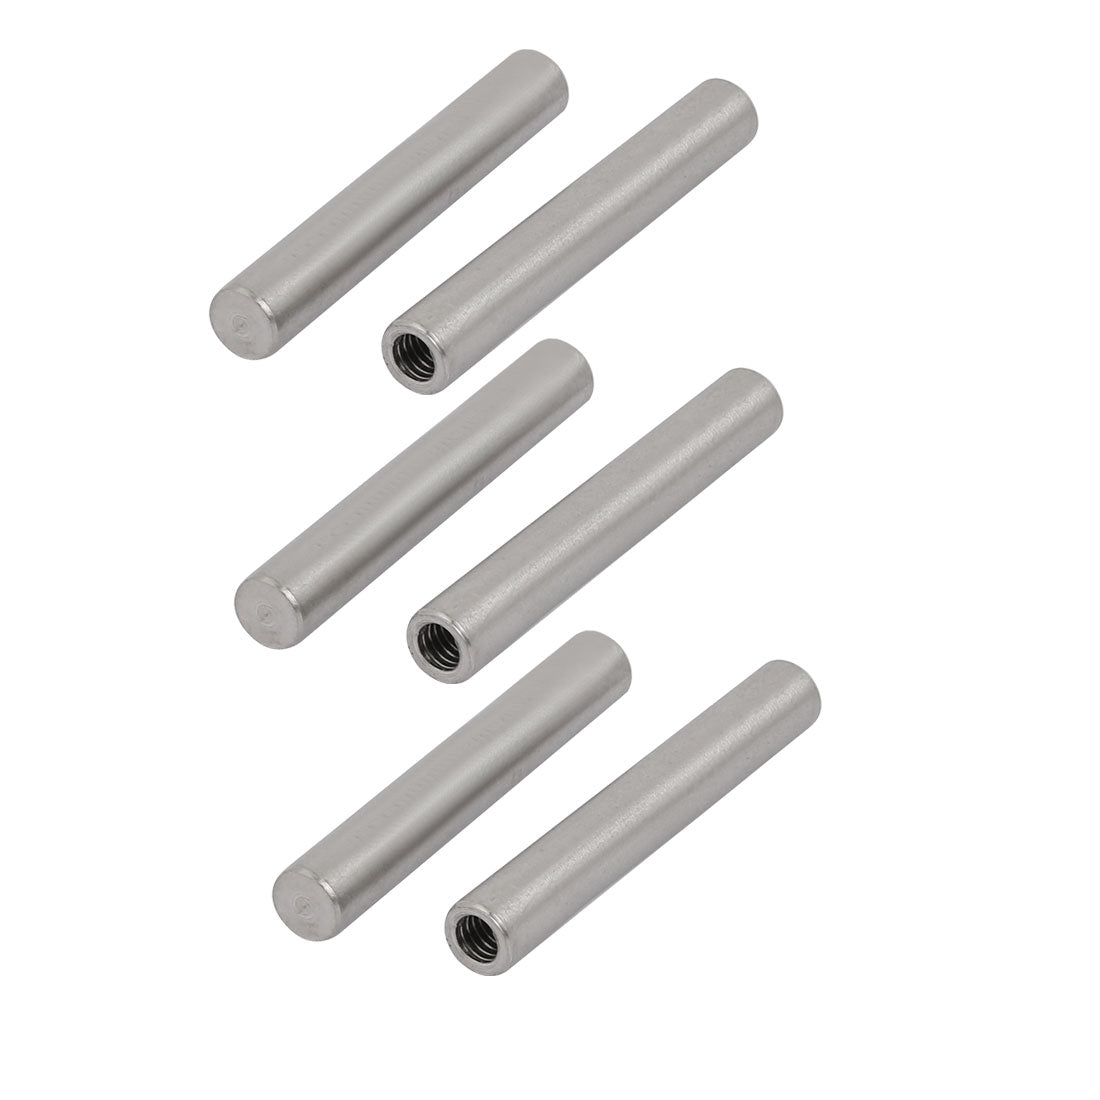 uxcell Uxcell 304 Stainless Steel M4 Female Thread 6mm x 40mm Cylindrical Dowel Pin 6pcs